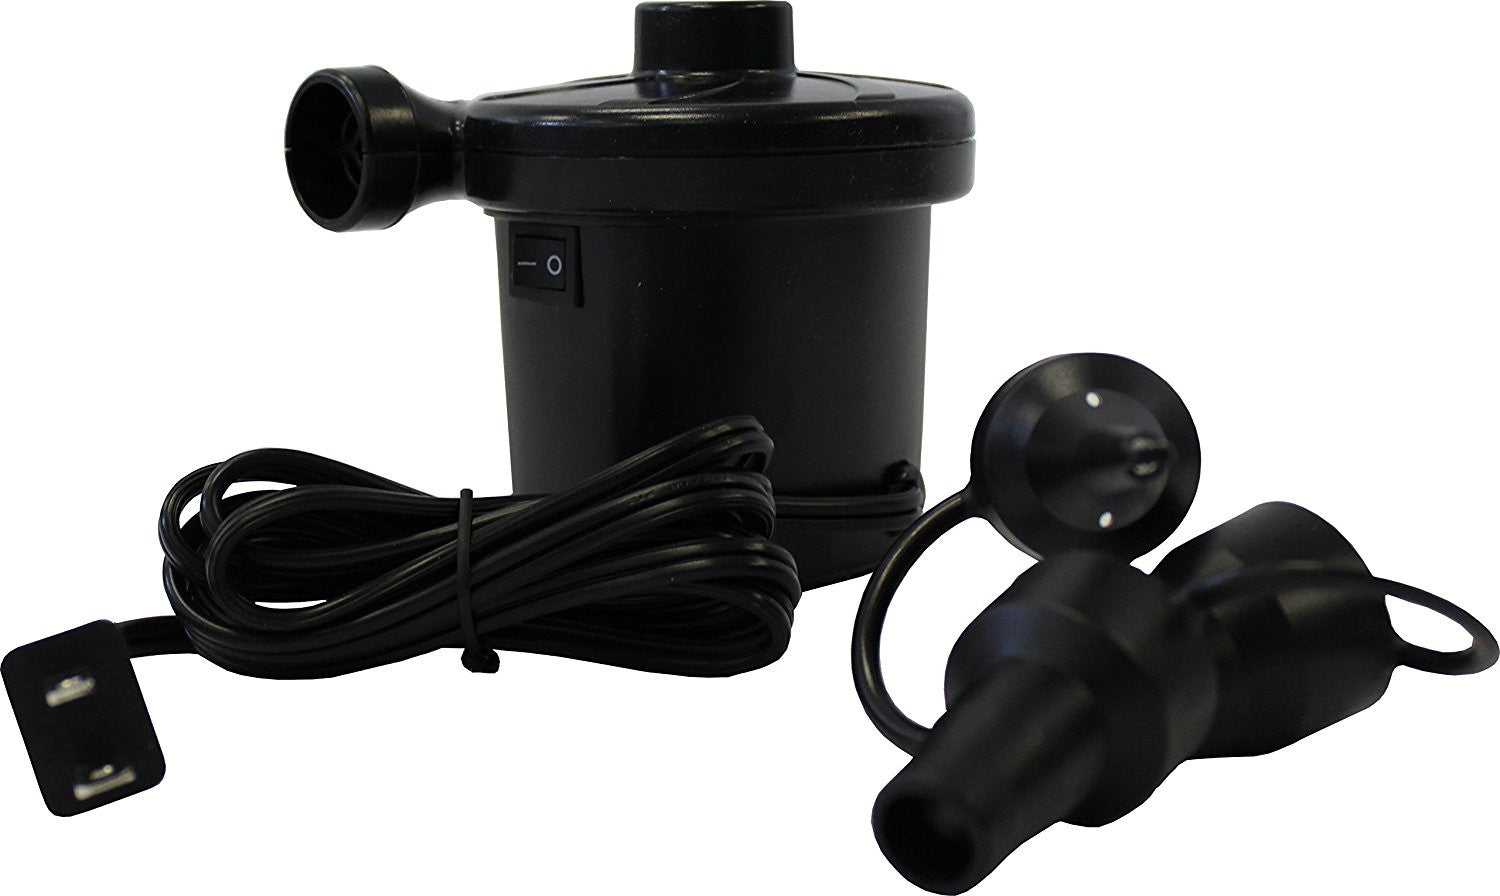 Jet Creations Electric Pump - Uses Car Charger